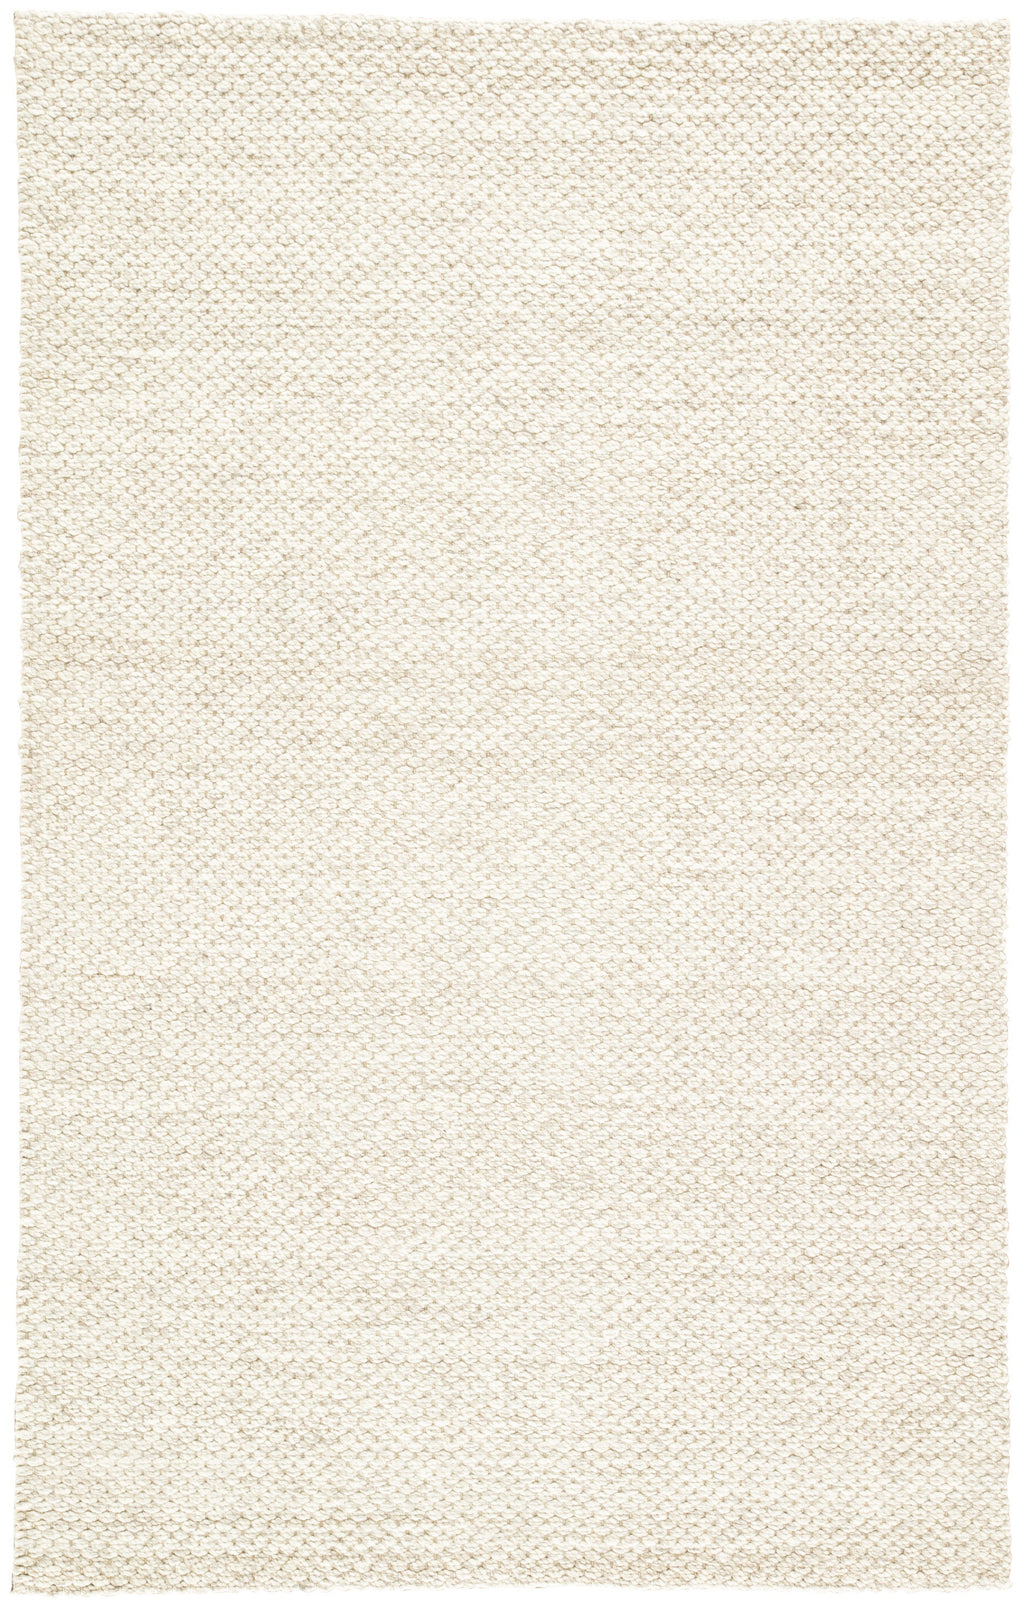 Karlstadt Solid Rug in Whisper White & Simply Taupe design by Jaipur Living